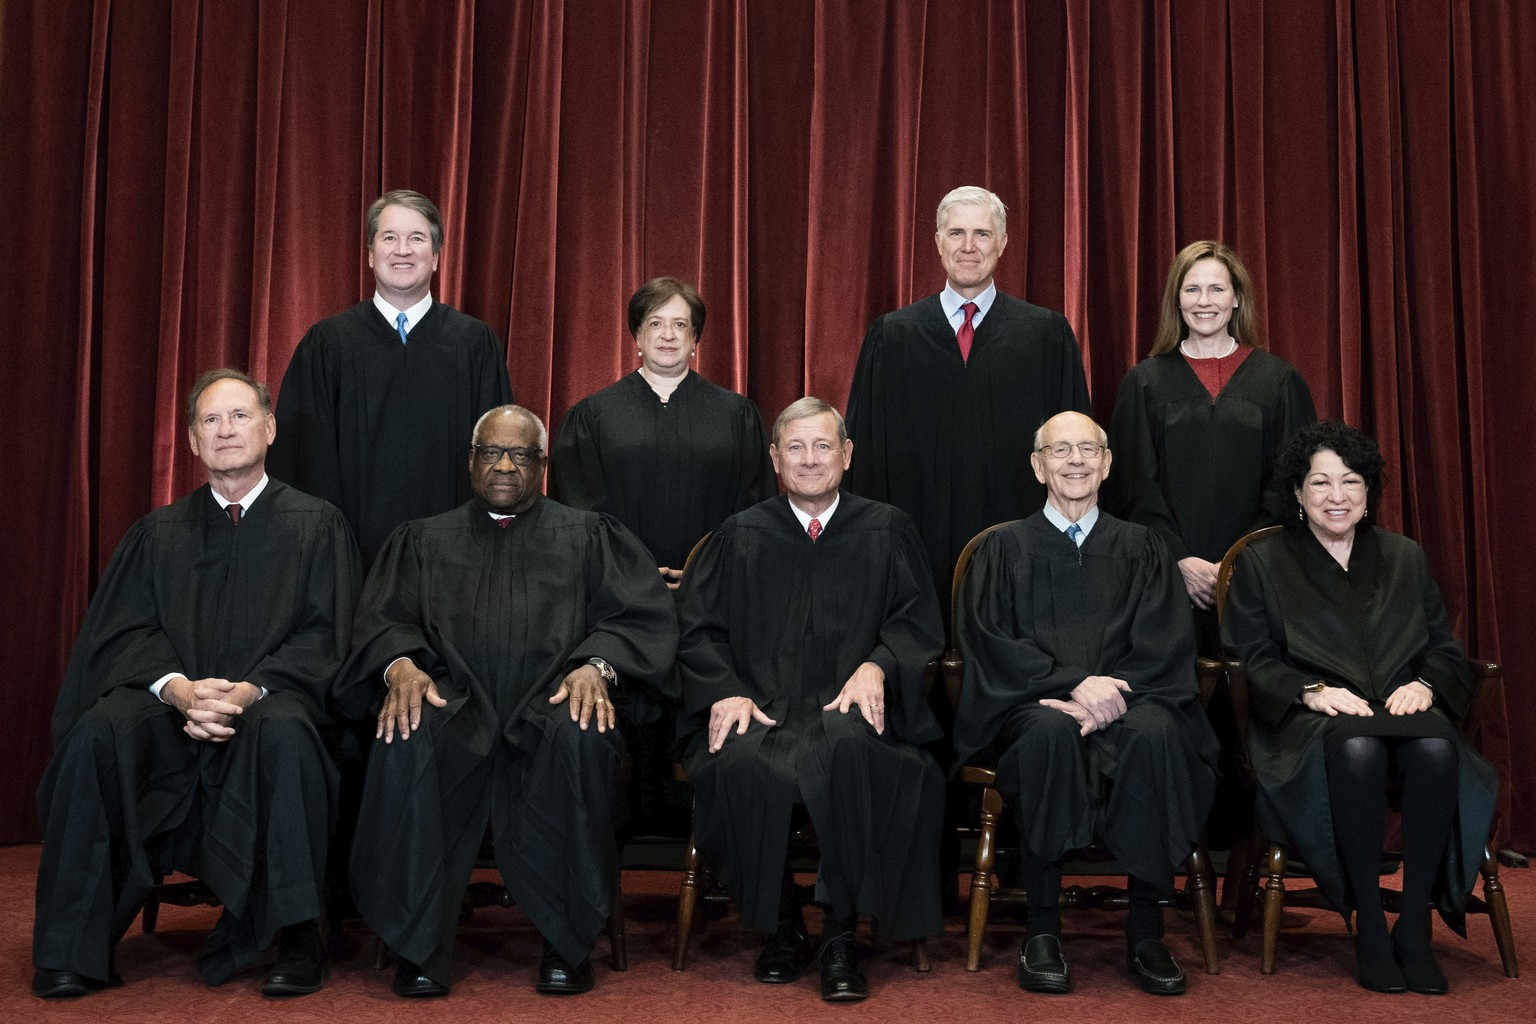 FILE - Members of the Supreme Court pose for a group photo at the Supreme Court in Washington, April 23, 2021. Seated from left are Associate Justice Samuel Alito, Associate Justice Clarence Thomas, C ...